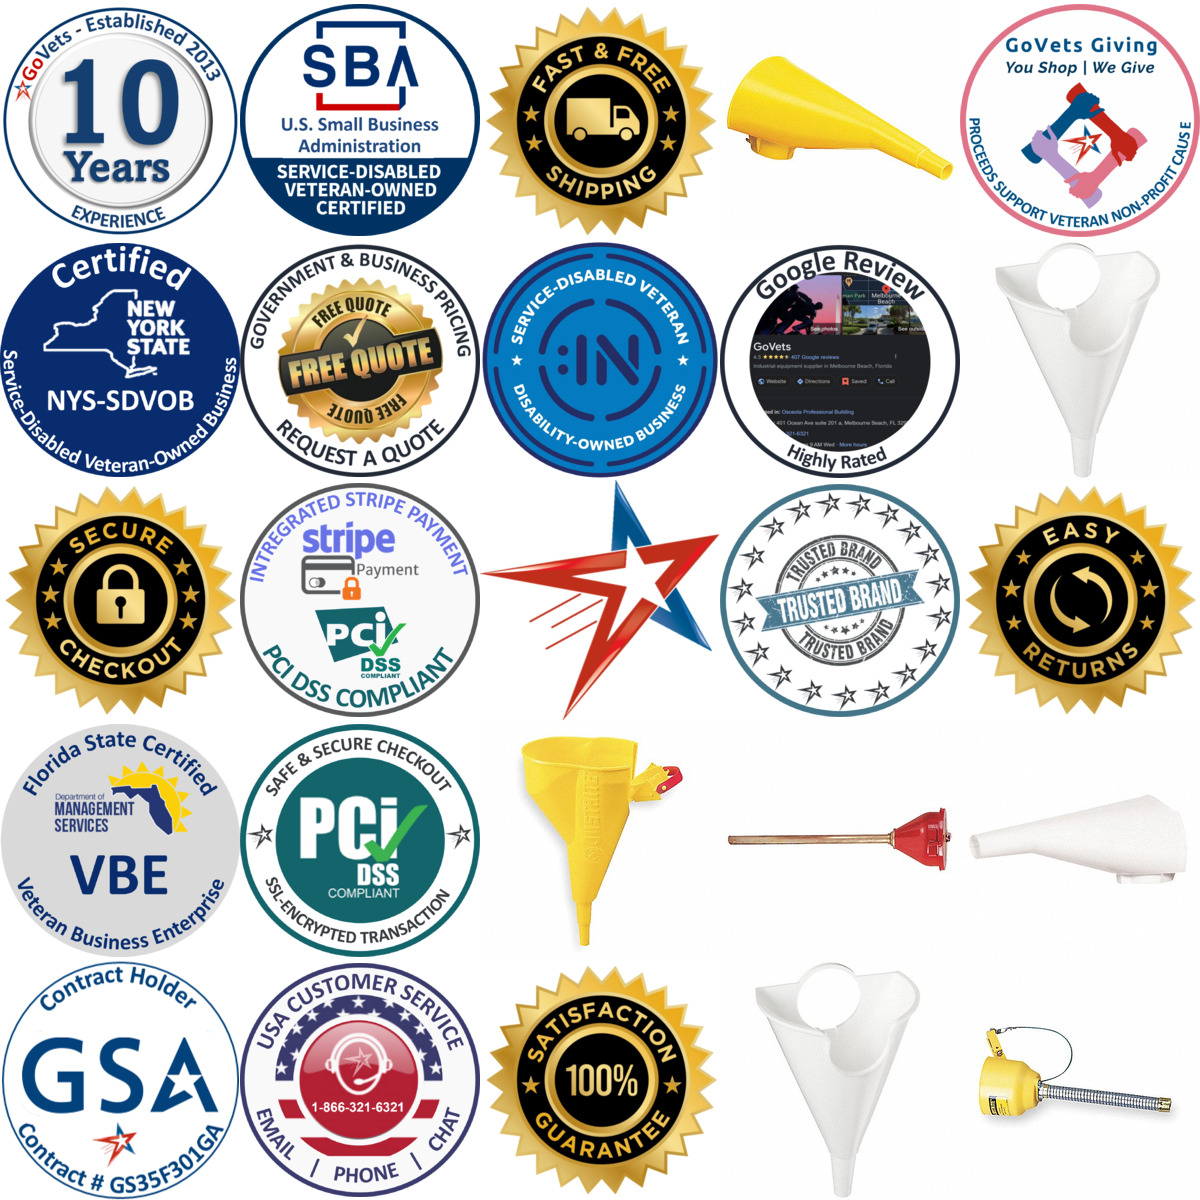 A selection of Safety Can Funnels products on GoVets